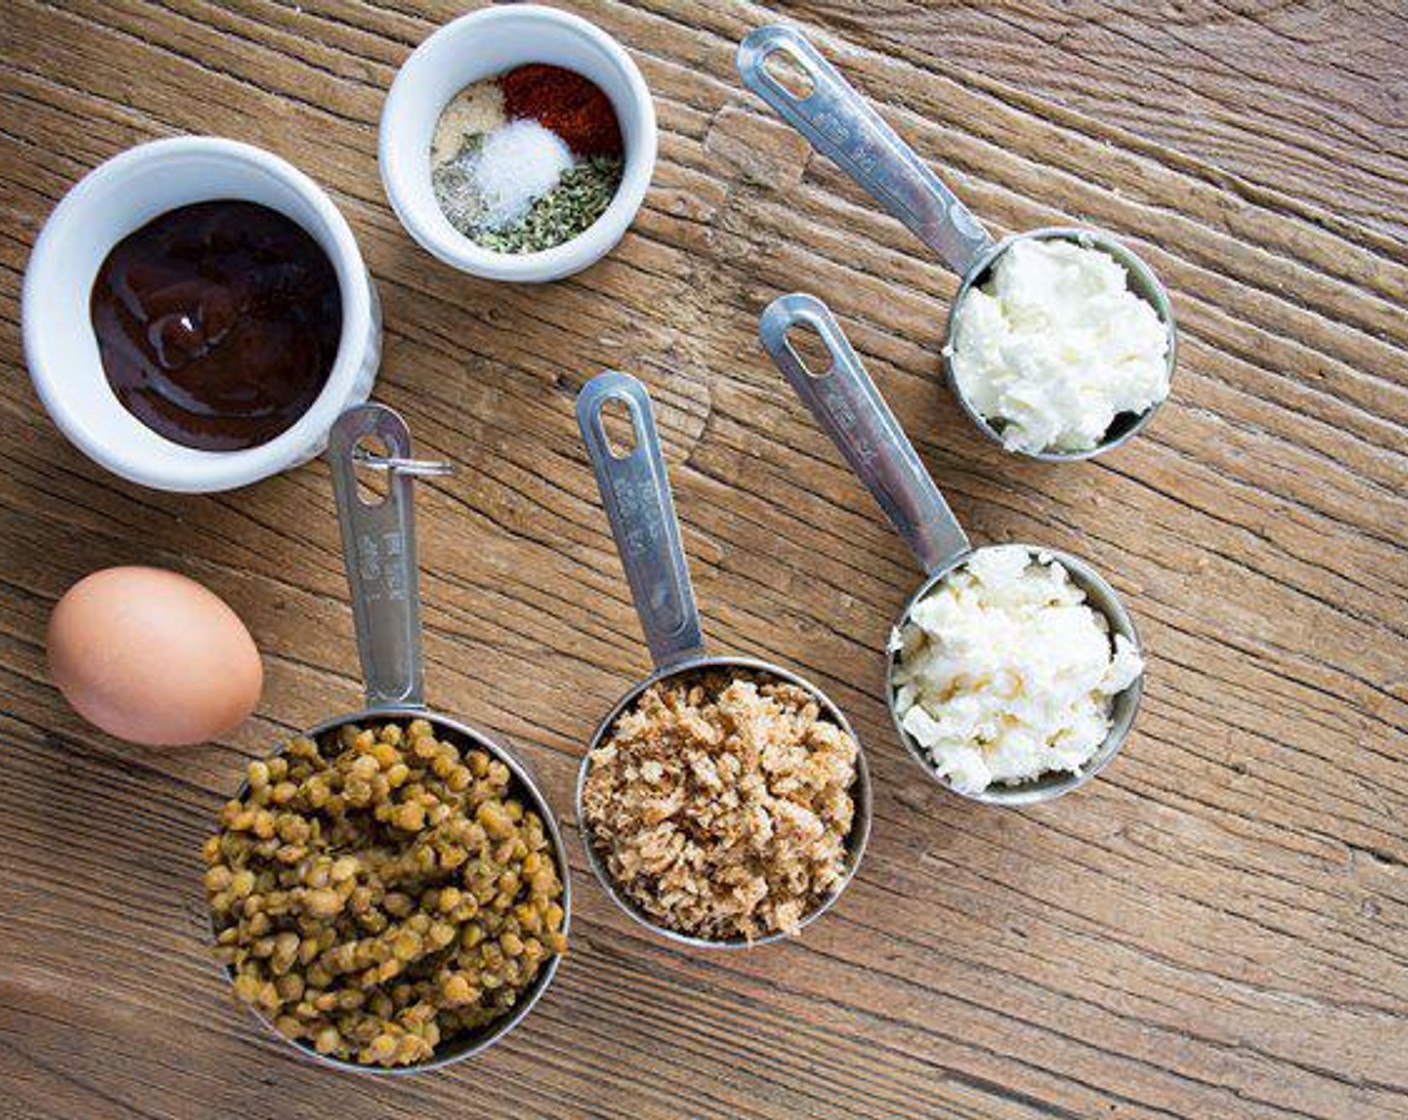 step 2 In a large bowl combine mashed lentils, Breadcrumbs (1/2 cup), Egg (1), Feta Cheese (1/2 cup), Goat Cheese (1/4 cup), McCormick® Garlic Powder (1 tsp), Dried Oregano (1 tsp), Paprika (1/2 tsp), Sea Salt (1/4 tsp), and Ground Black Pepper (1/4 tsp). Stir until well combined then place in the fridge for 10 minutes.